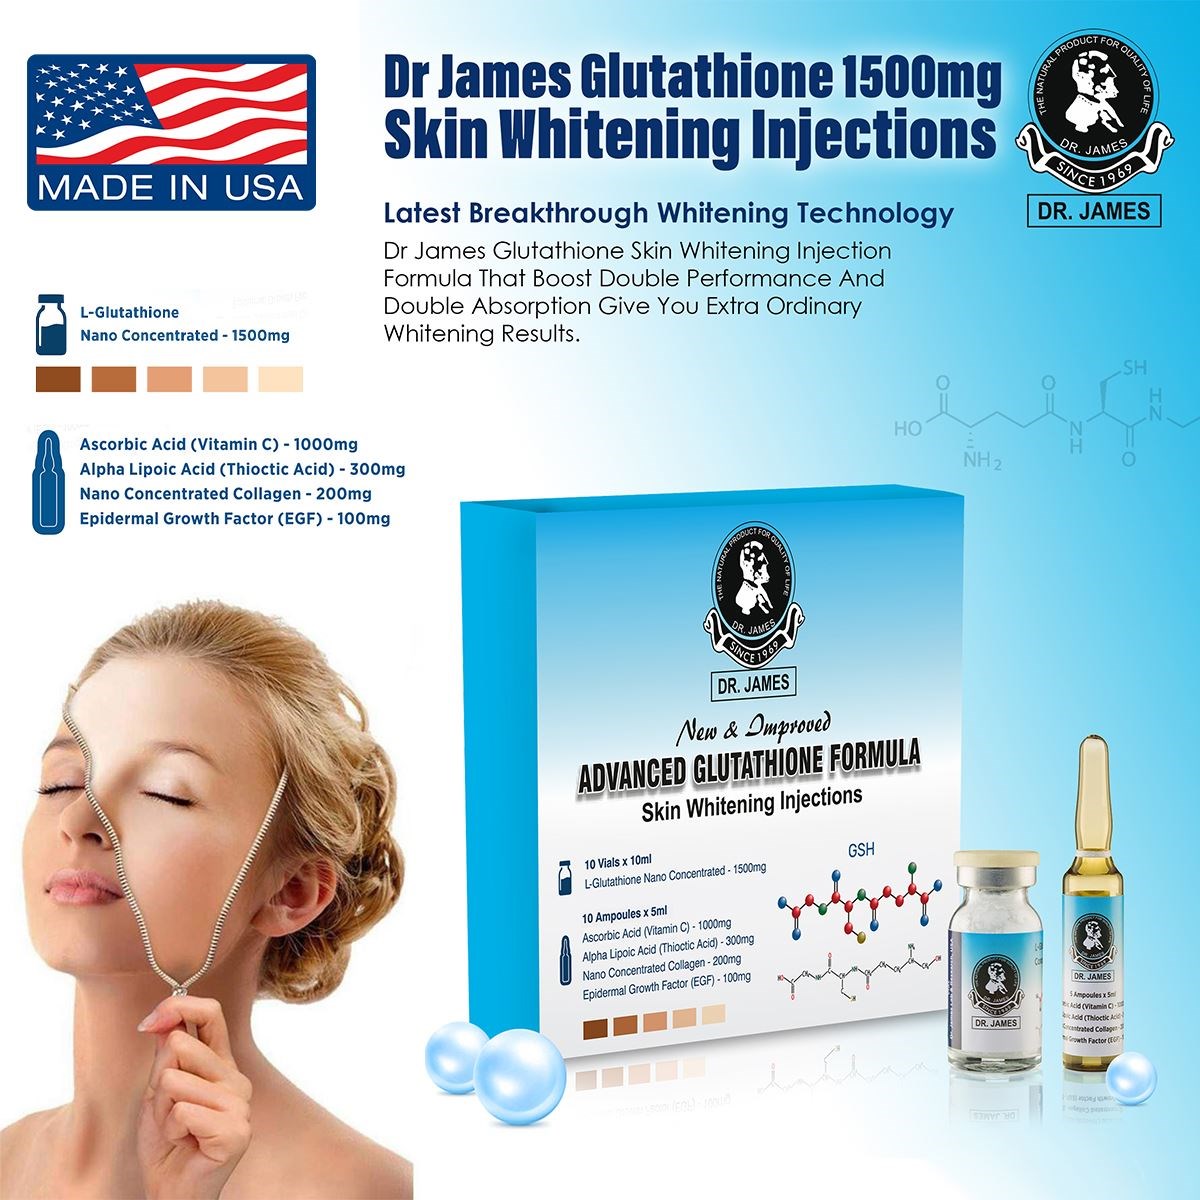 dr james glutathione 1500mg skin whitening injections